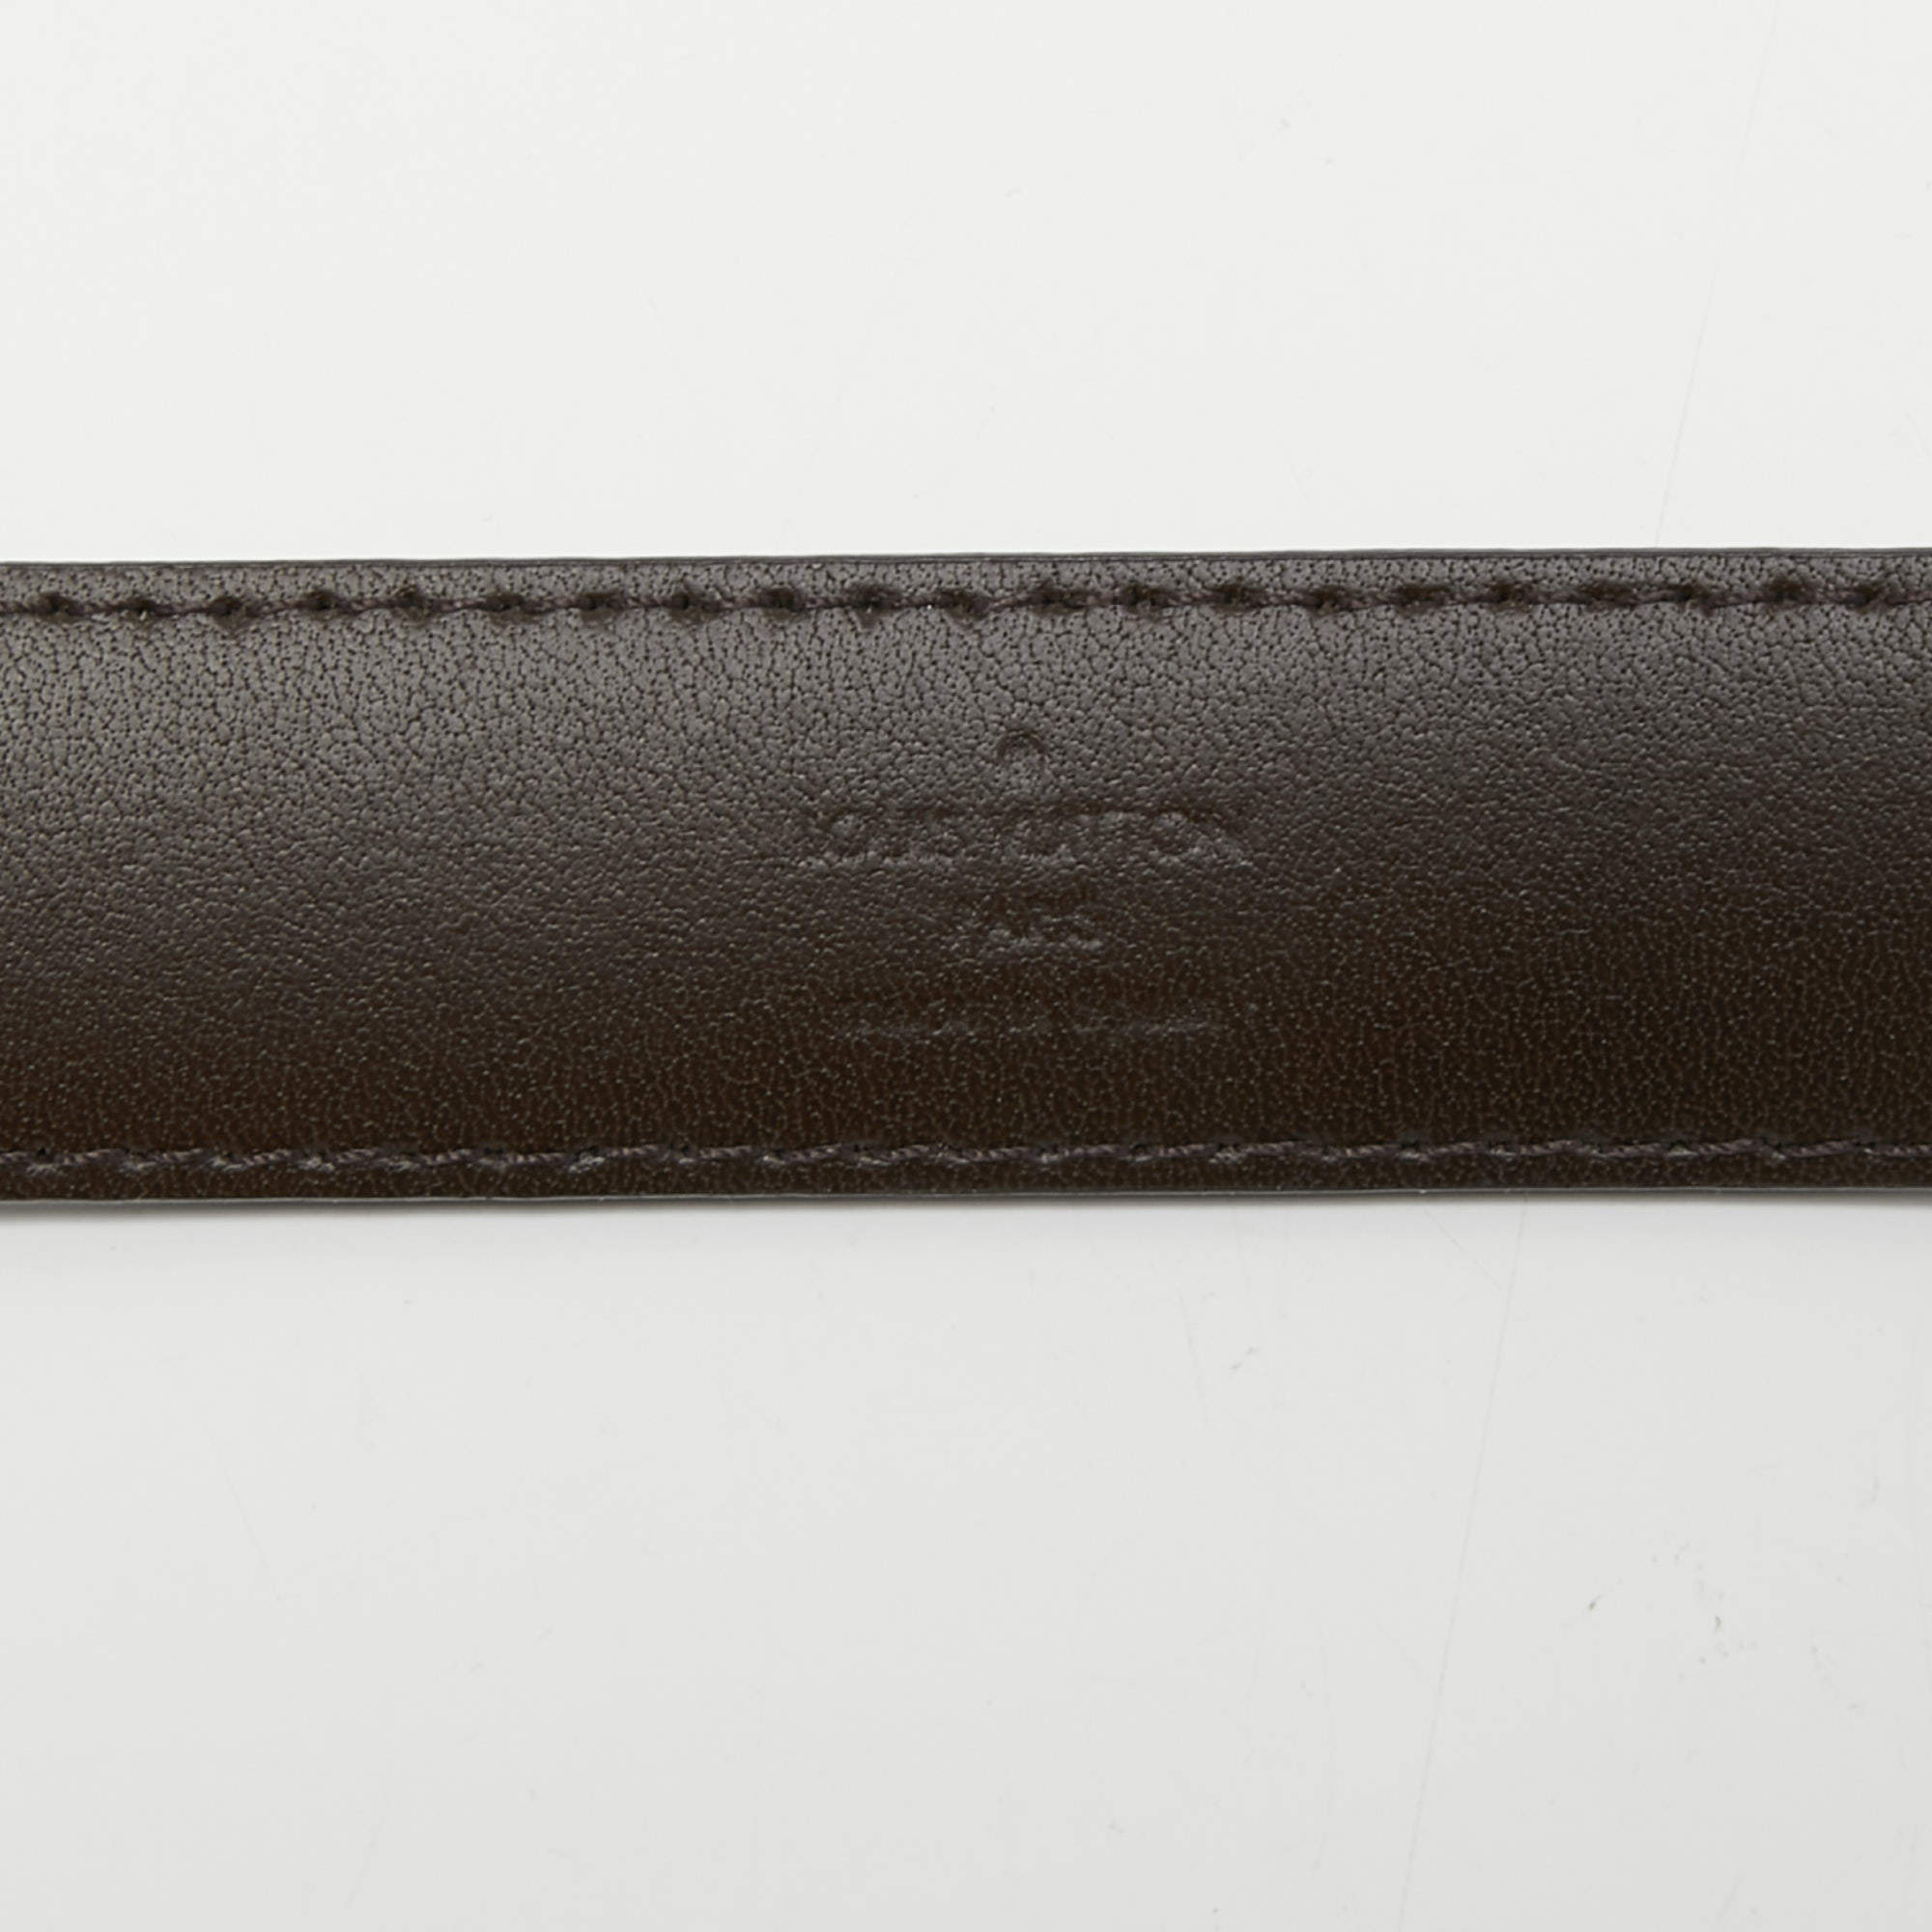 Lv circle belt Louis Vuitton Brown size 80 cm in Polyester - 34958714